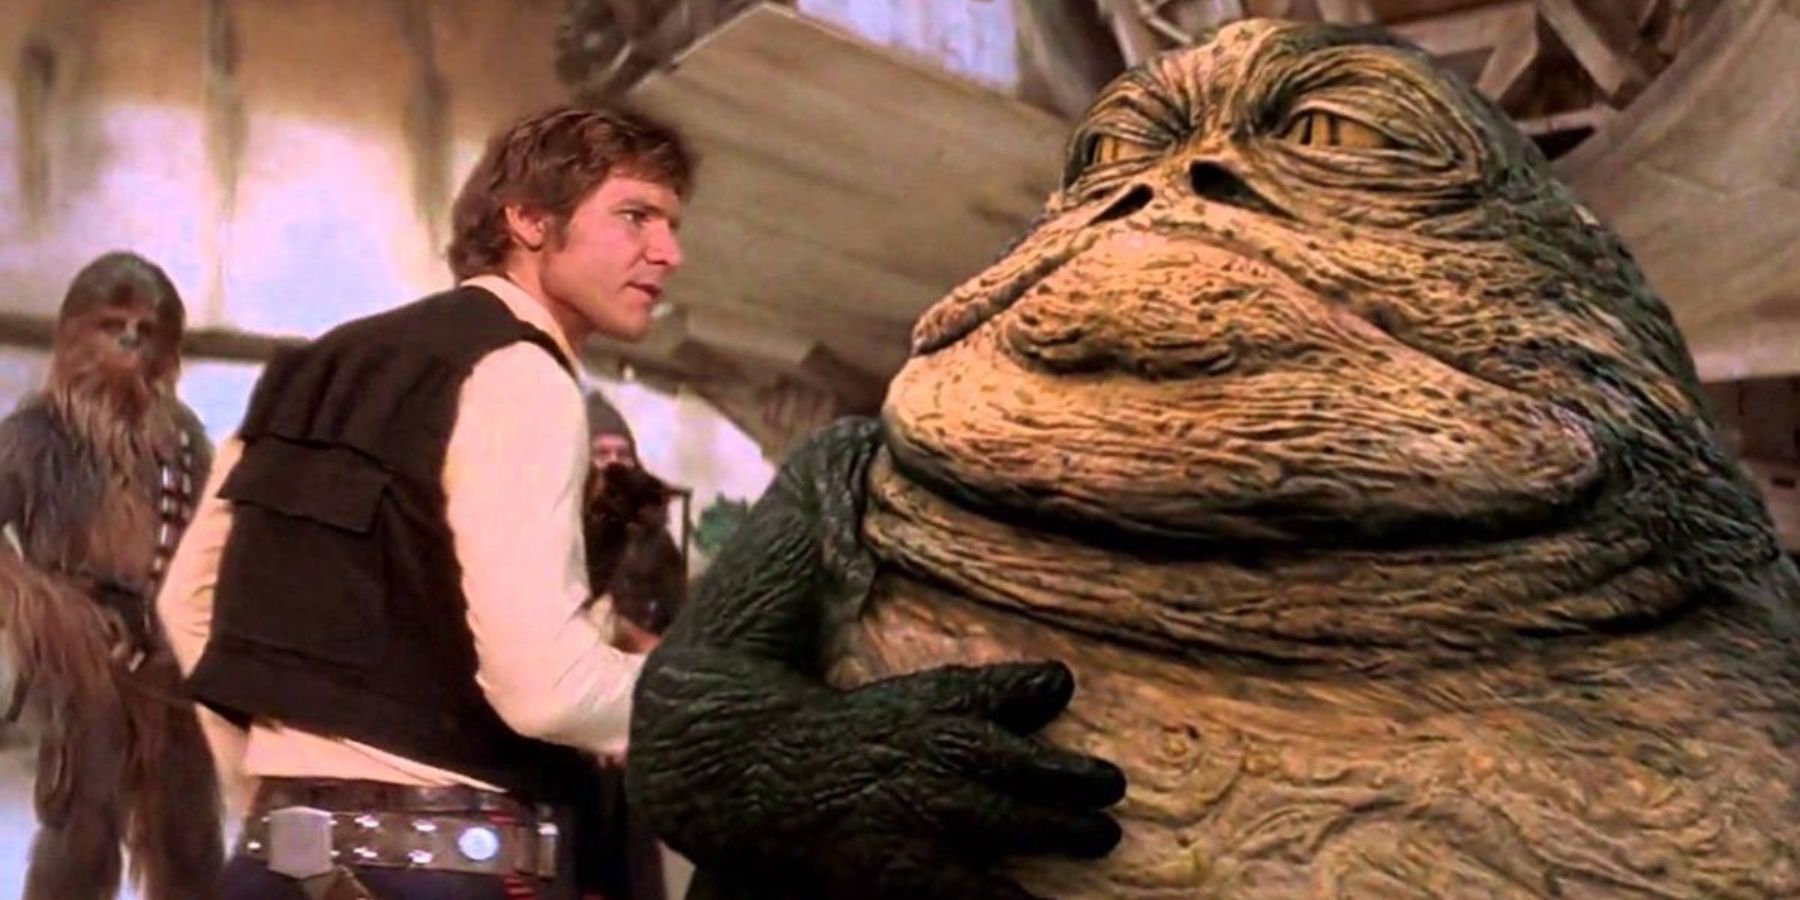 Chewbacca, Han Solo, and Jabba the Hutt in Star Wars Special Edition